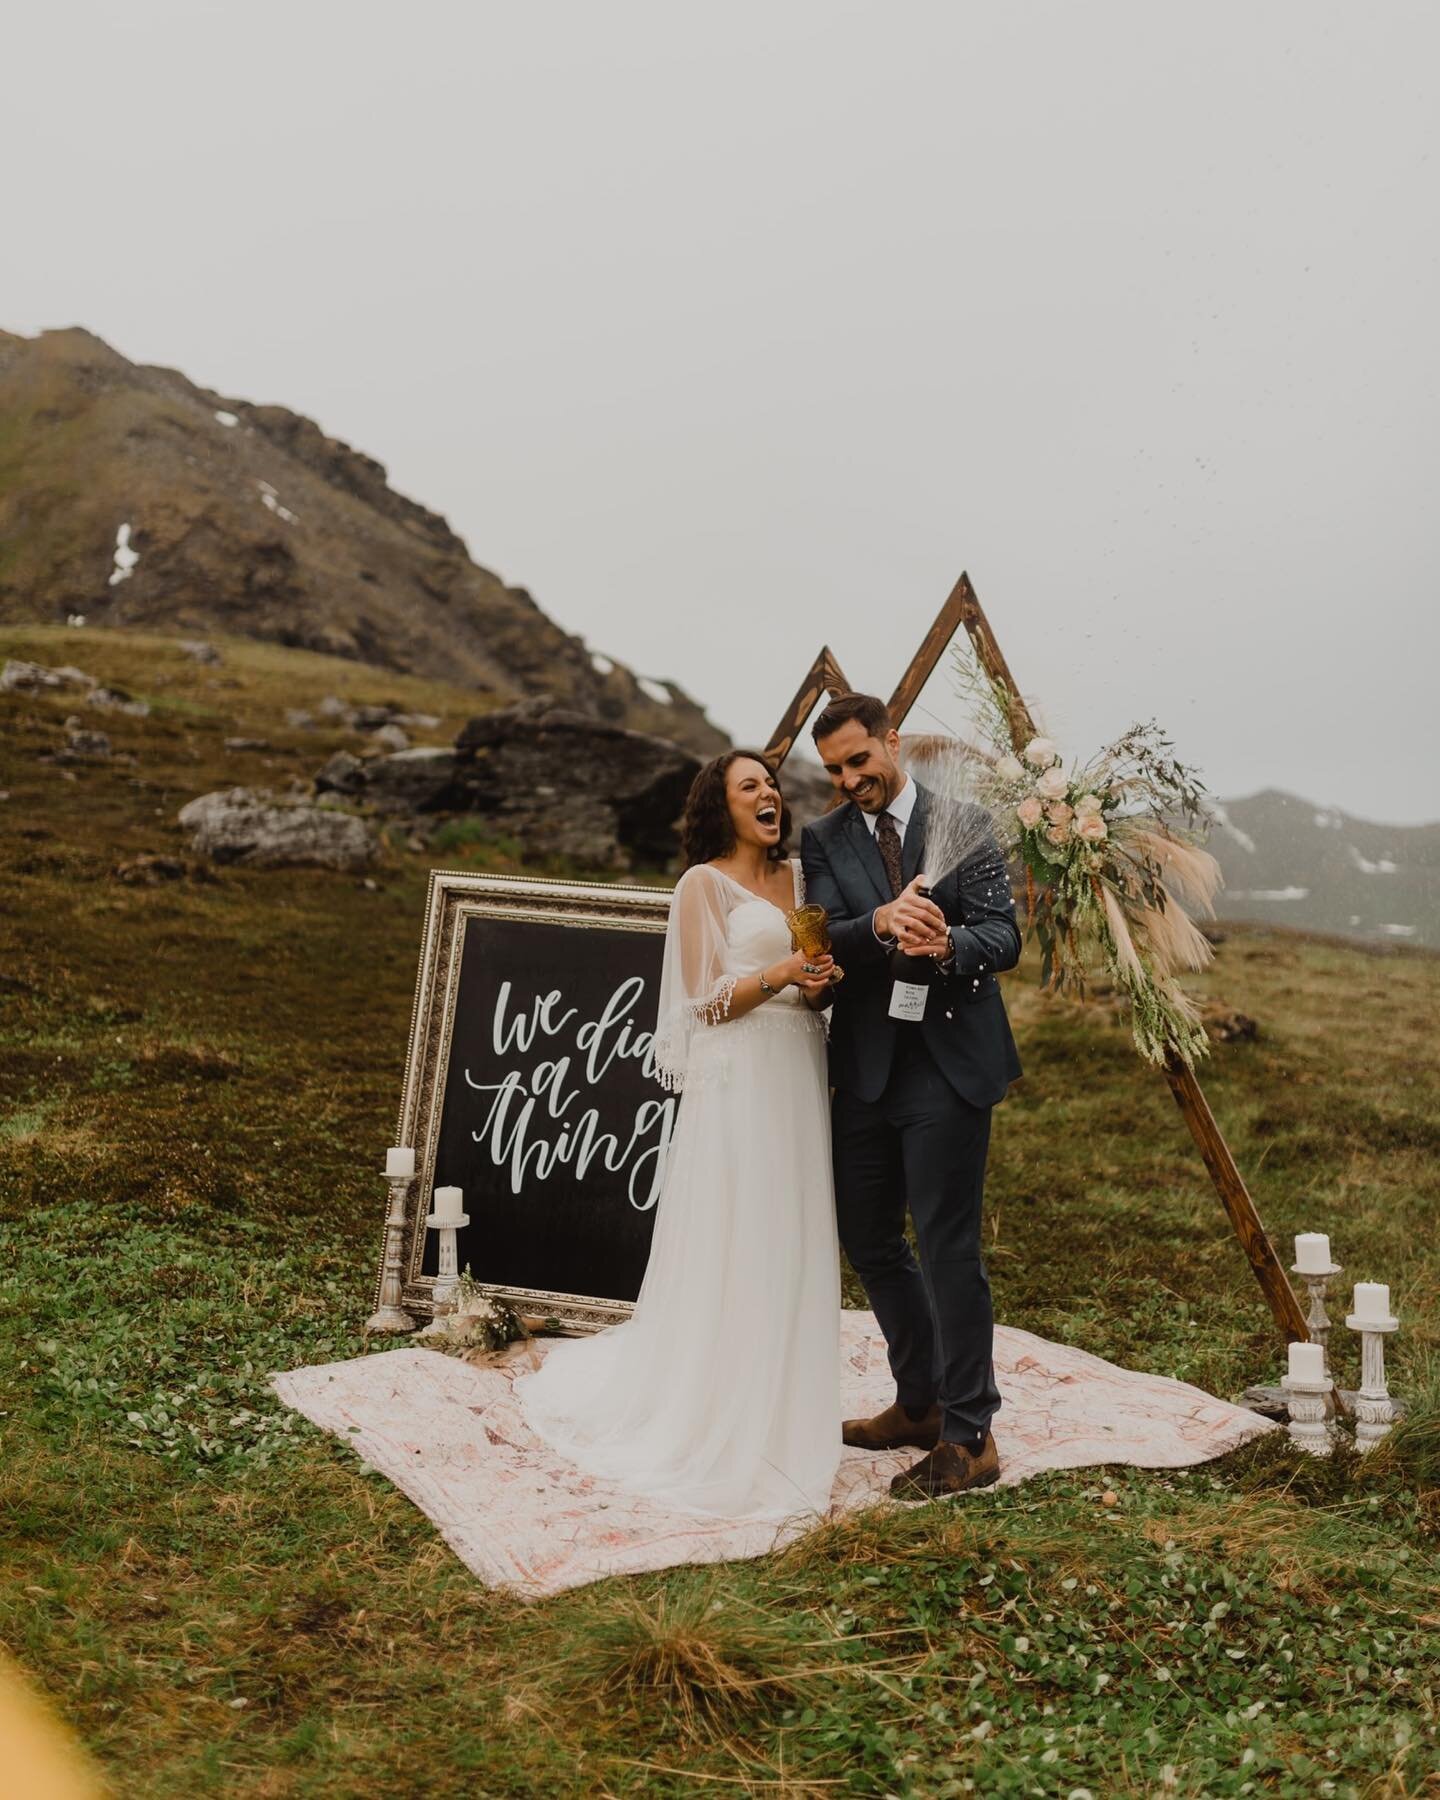 I mean, if you&rsquo;re going to elope in the pouring rain, why not have the coziest camp to snuggle up in afterwards? 😍⛰
.
.
.
.
.

HOST: @m.wardphotography 
MODELS: @kd_aregood + @zacharegood 
WEDDING COORDINATOR: @eventsbyayla 
DECOR: @jnmakweddi